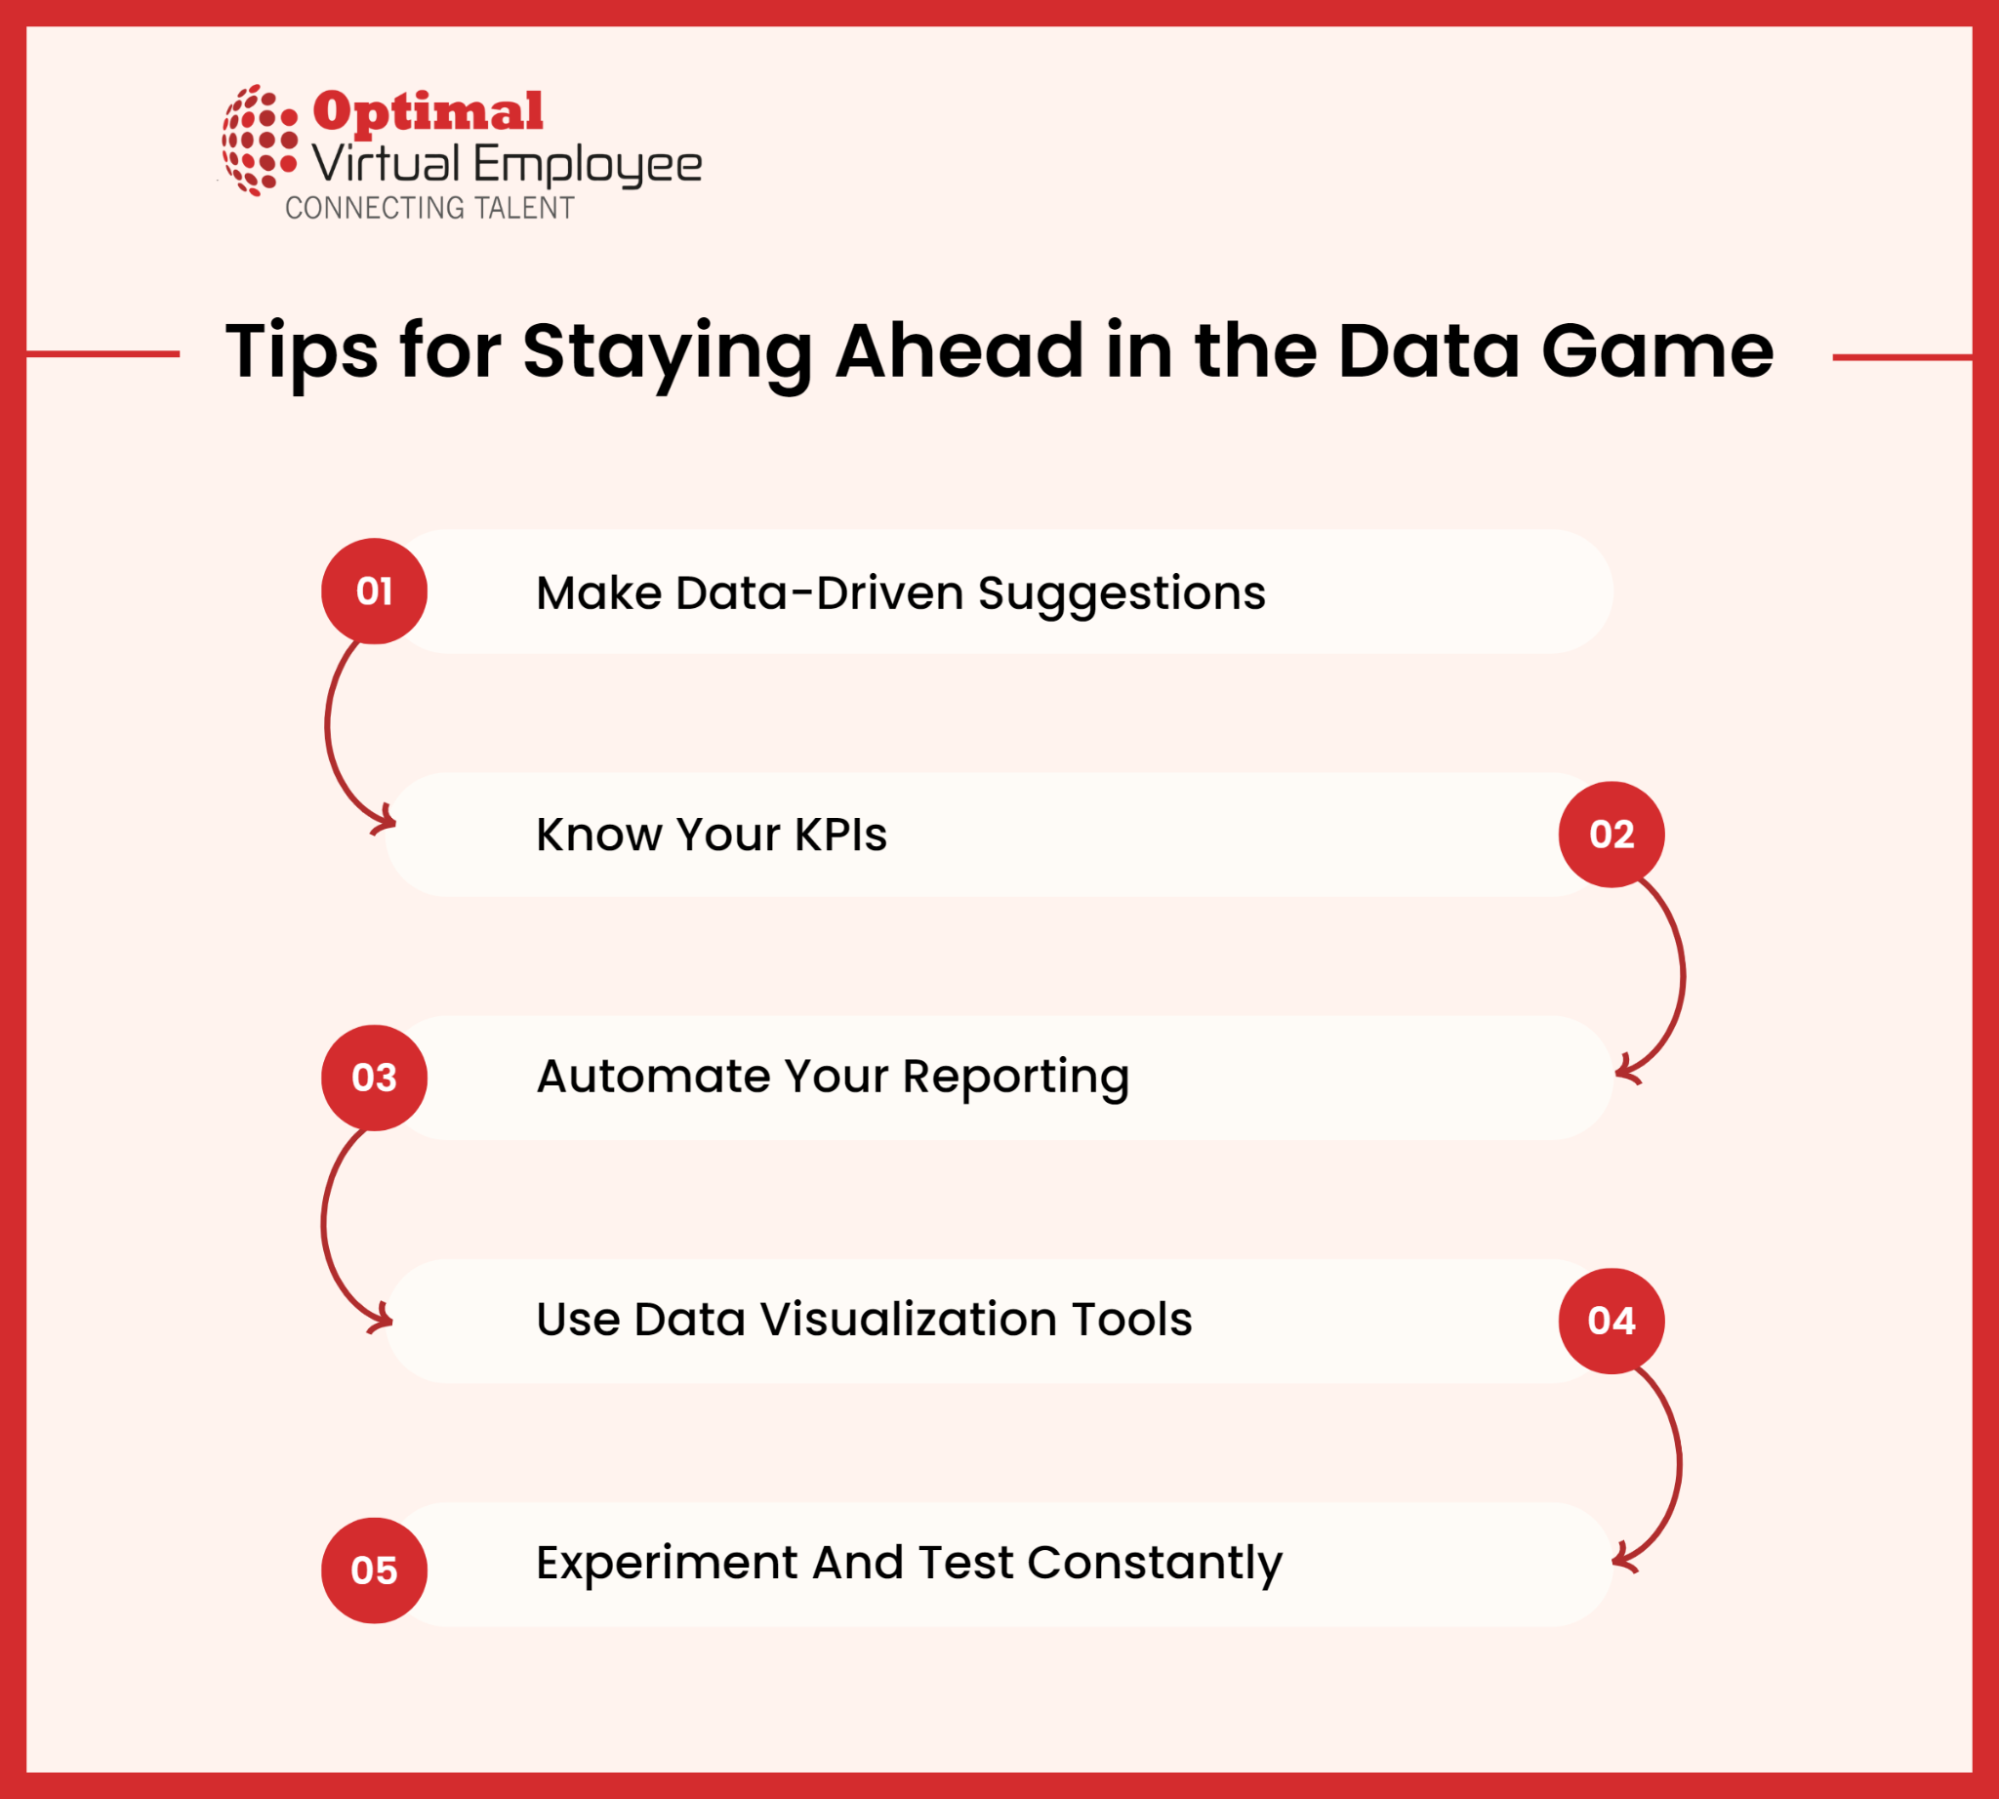 Tips for Staying Ahead in the Data Game